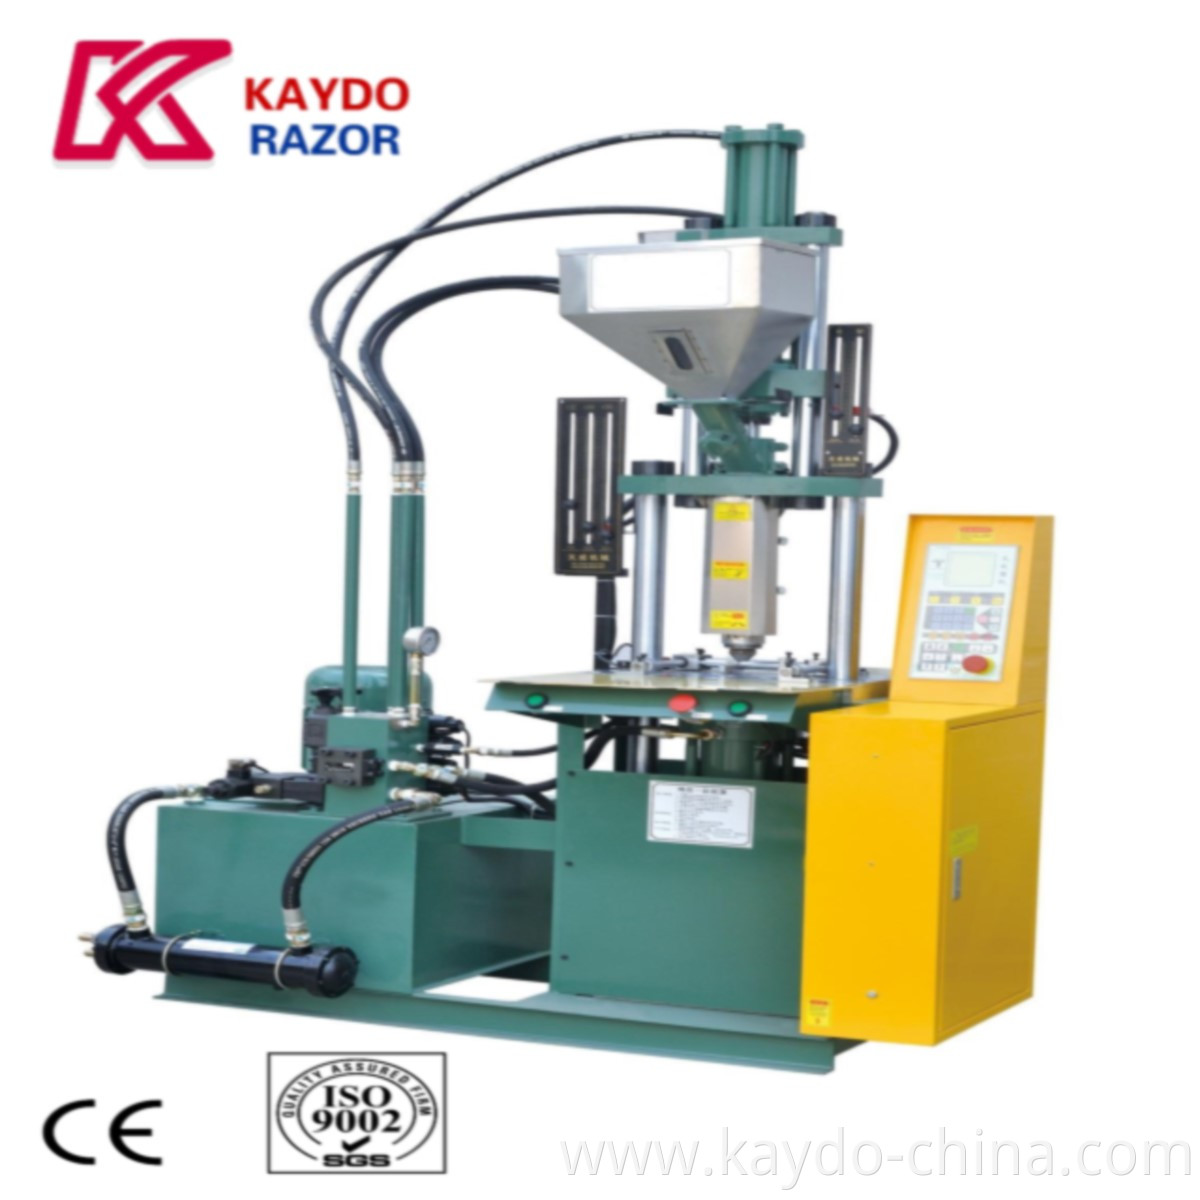 45T vertical injection molding machine